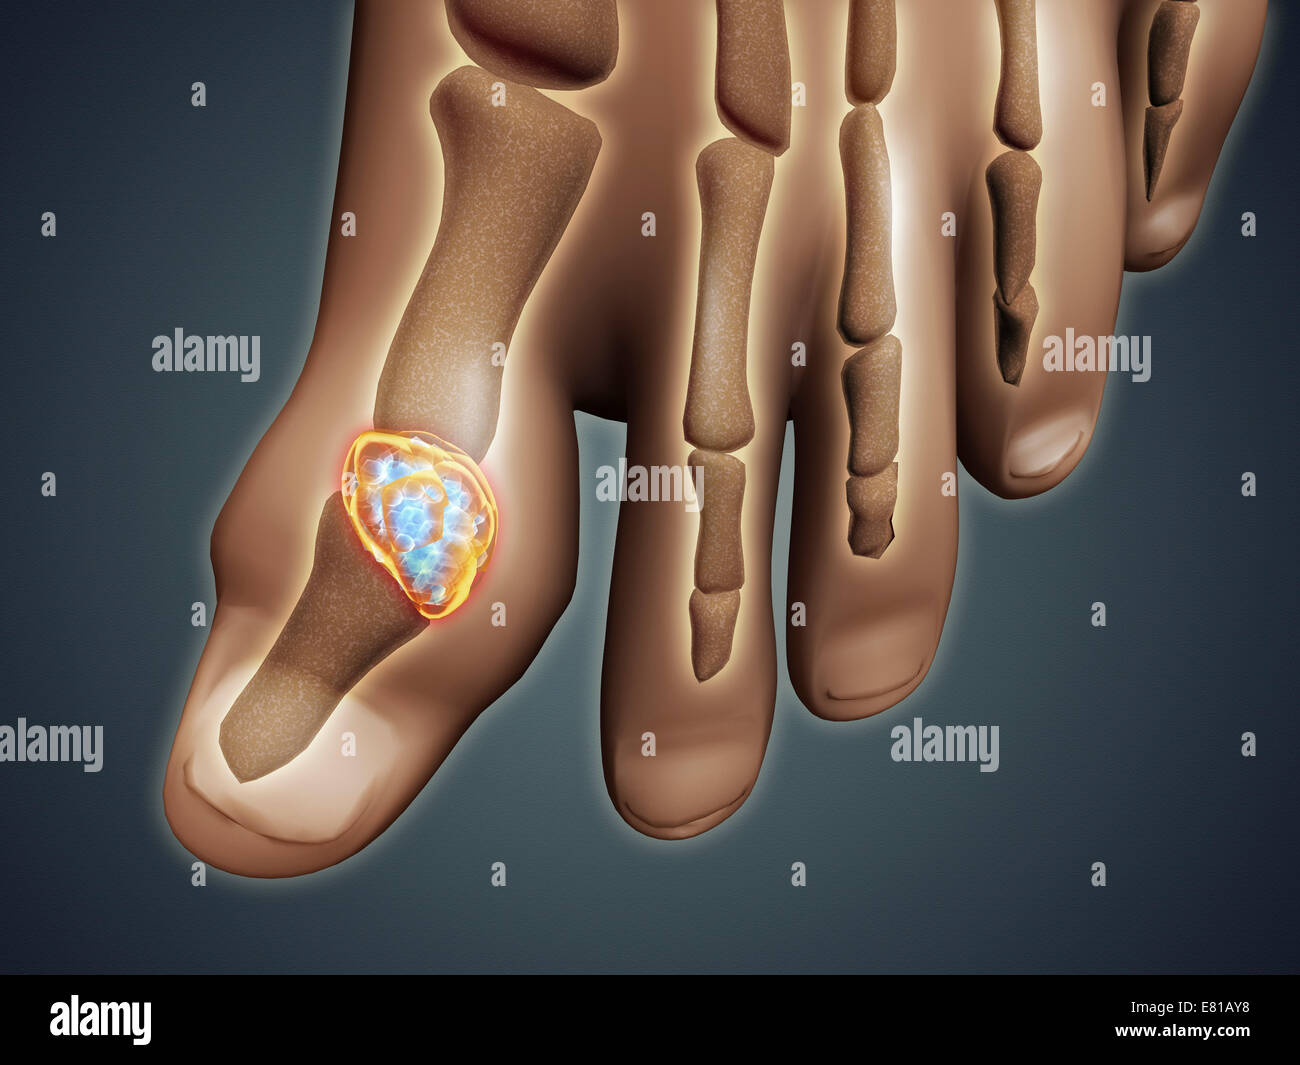 Conceptual image of gout in the big toe. Gout is a form of inflammatory arthritis that causes sudden, severe pain, swelling and Stock Photo